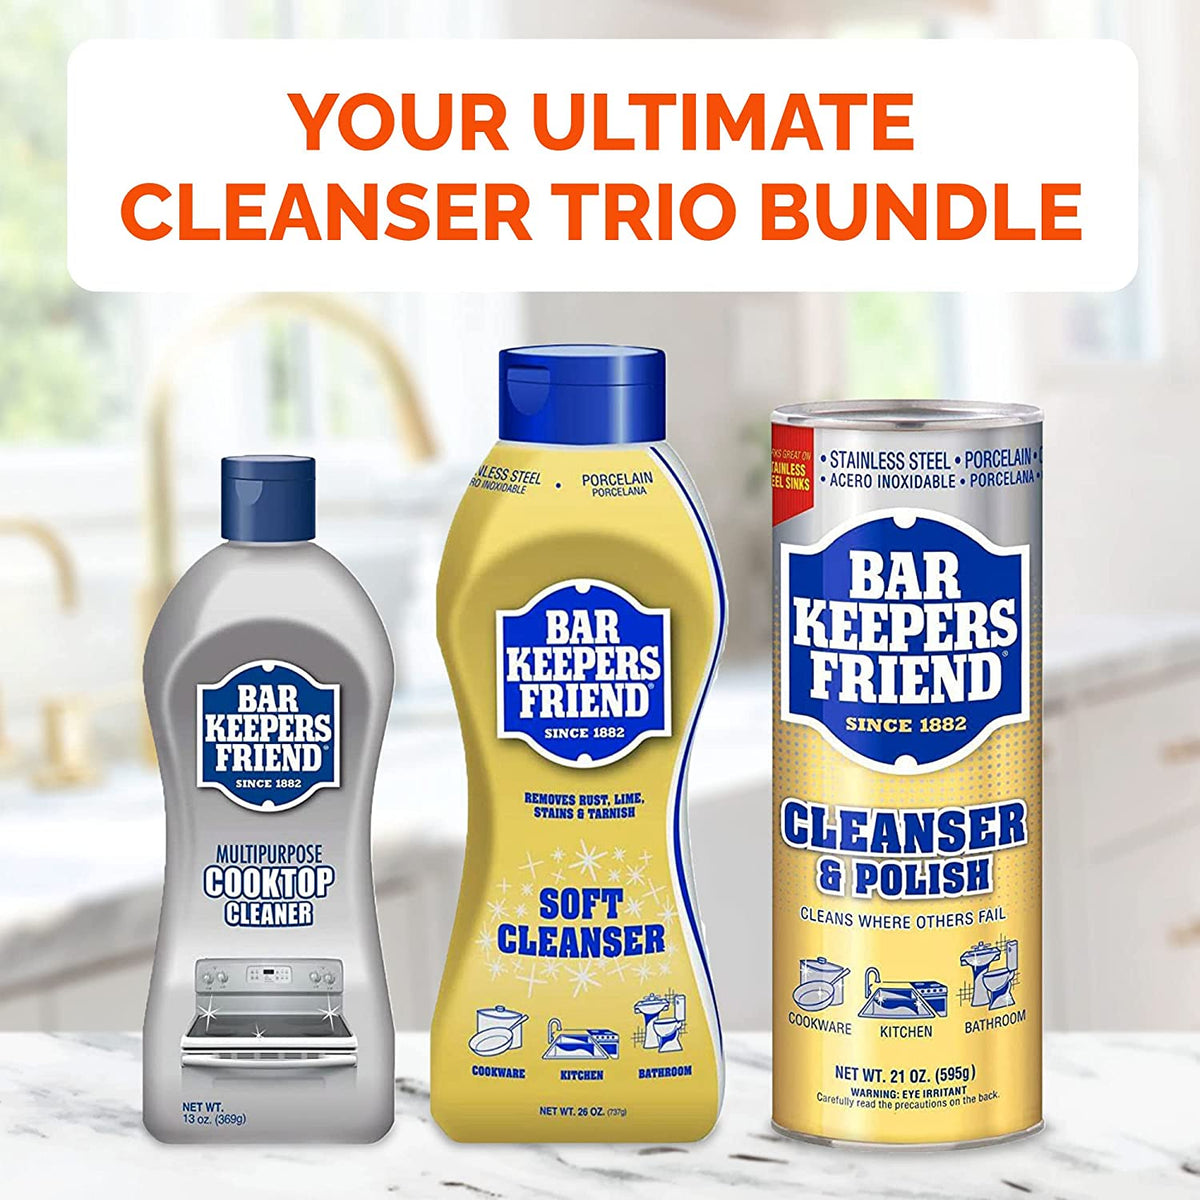 Bar Keepers Friend Cooktop Cleaner Kit by FoxtrotLiving